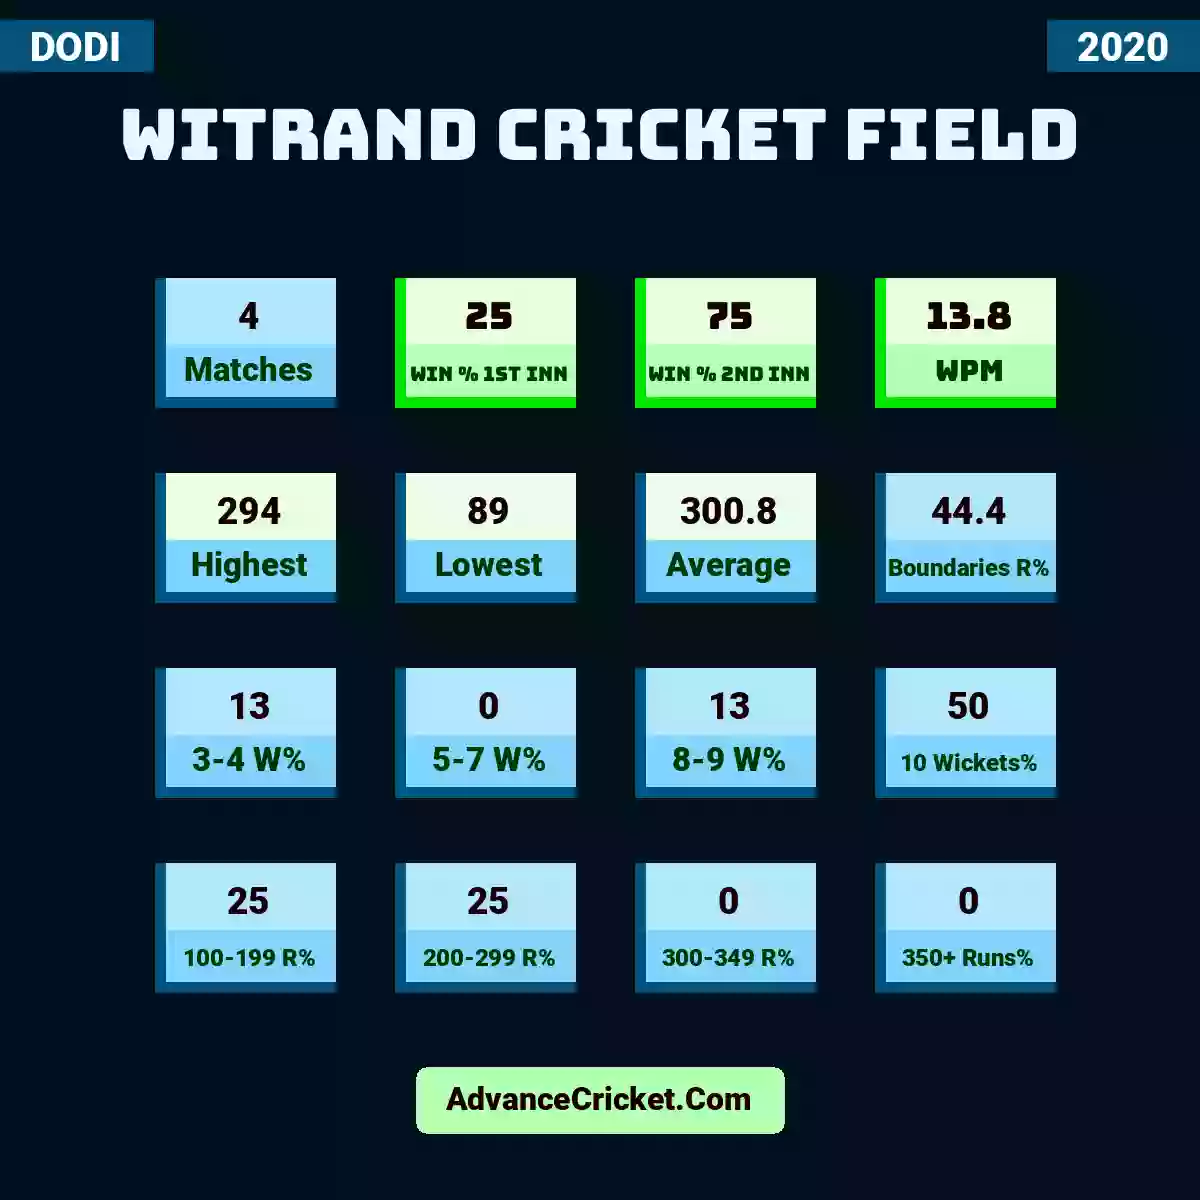 Image showing Witrand Cricket Field with Matches: 4, Win % 1st Inn: 25, Win % 2nd Inn: 75, WPM: 13.8, Highest: 294, Lowest: 89, Average: 300.8, Boundaries R%: 44.4, 3-4 W%: 13, 5-7 W%: 0, 8-9 W%: 13, 10 Wickets%: 50, 100-199 R%: 25, 200-299 R%: 25, 300-349 R%: 0, 350+ Runs%: 0.